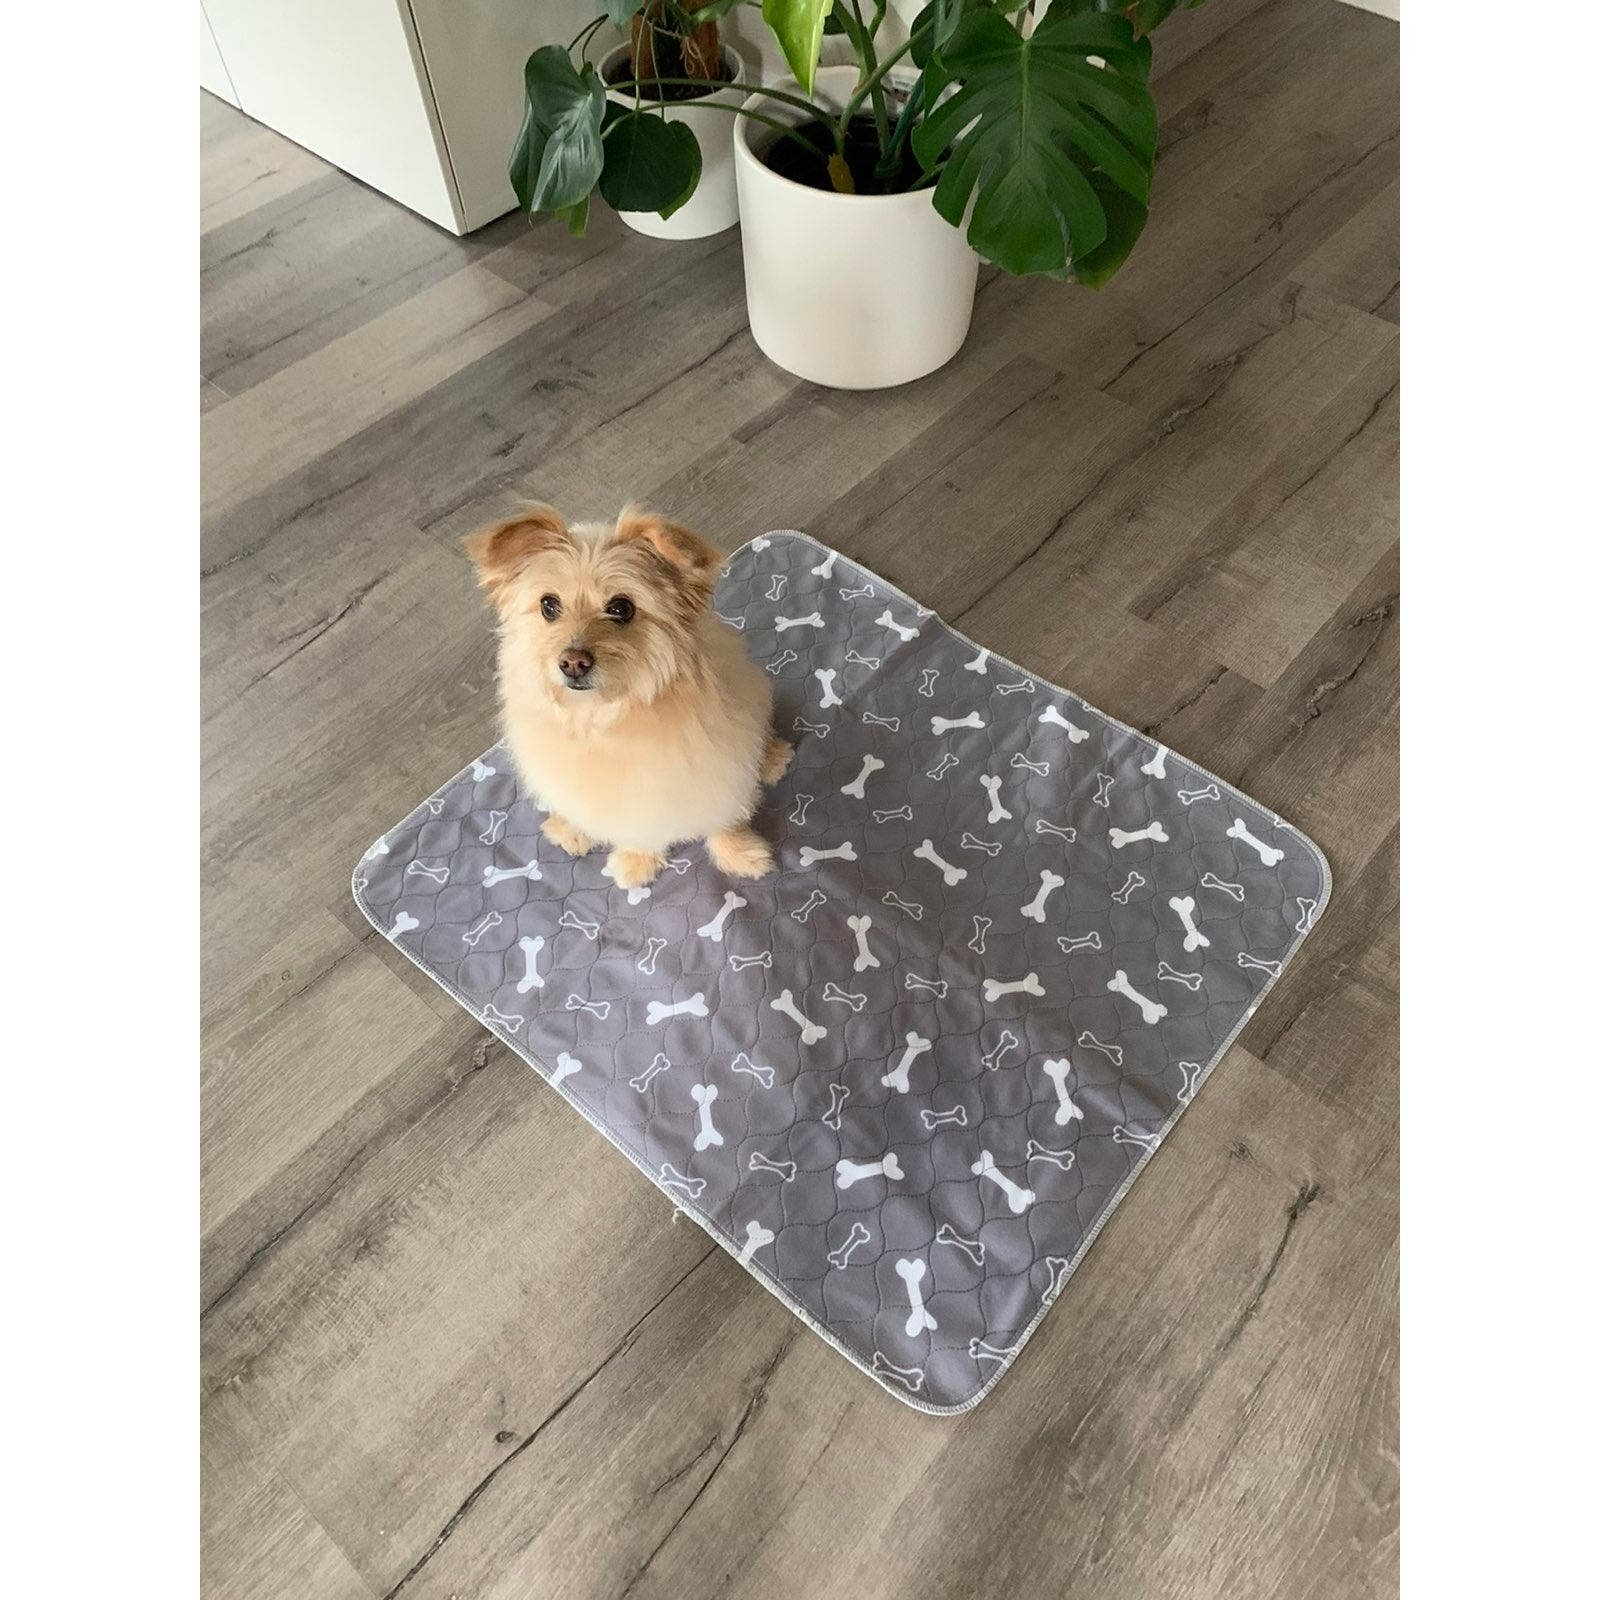 Reusable and washable pet pad 1oolZoeln